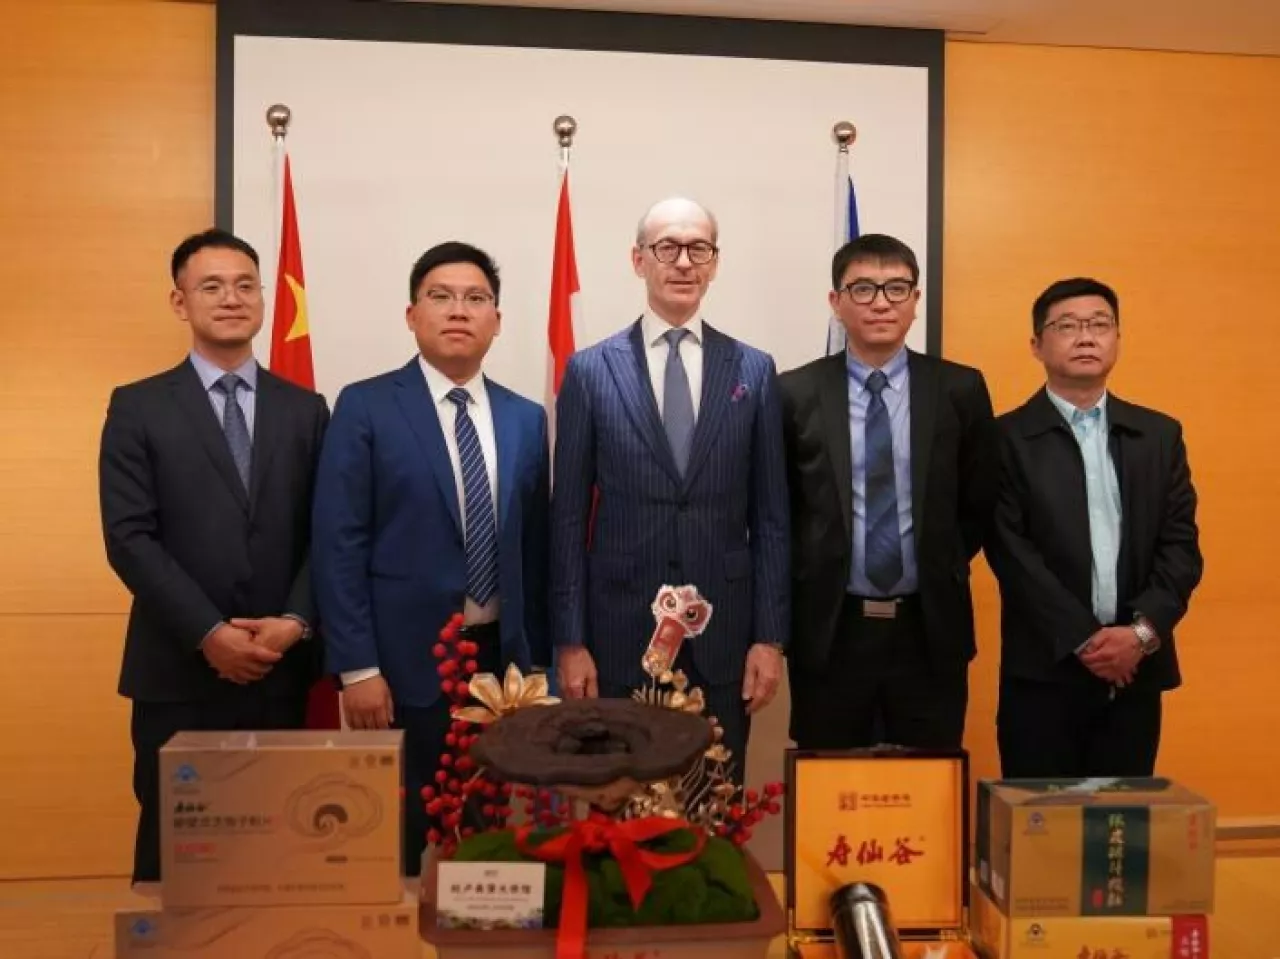 A team of representatives from Zhejiang Longevity Valley Botanical Co., Ltd (603896.SH) visited the Luxembourg Embassy in China on April 27. img#1